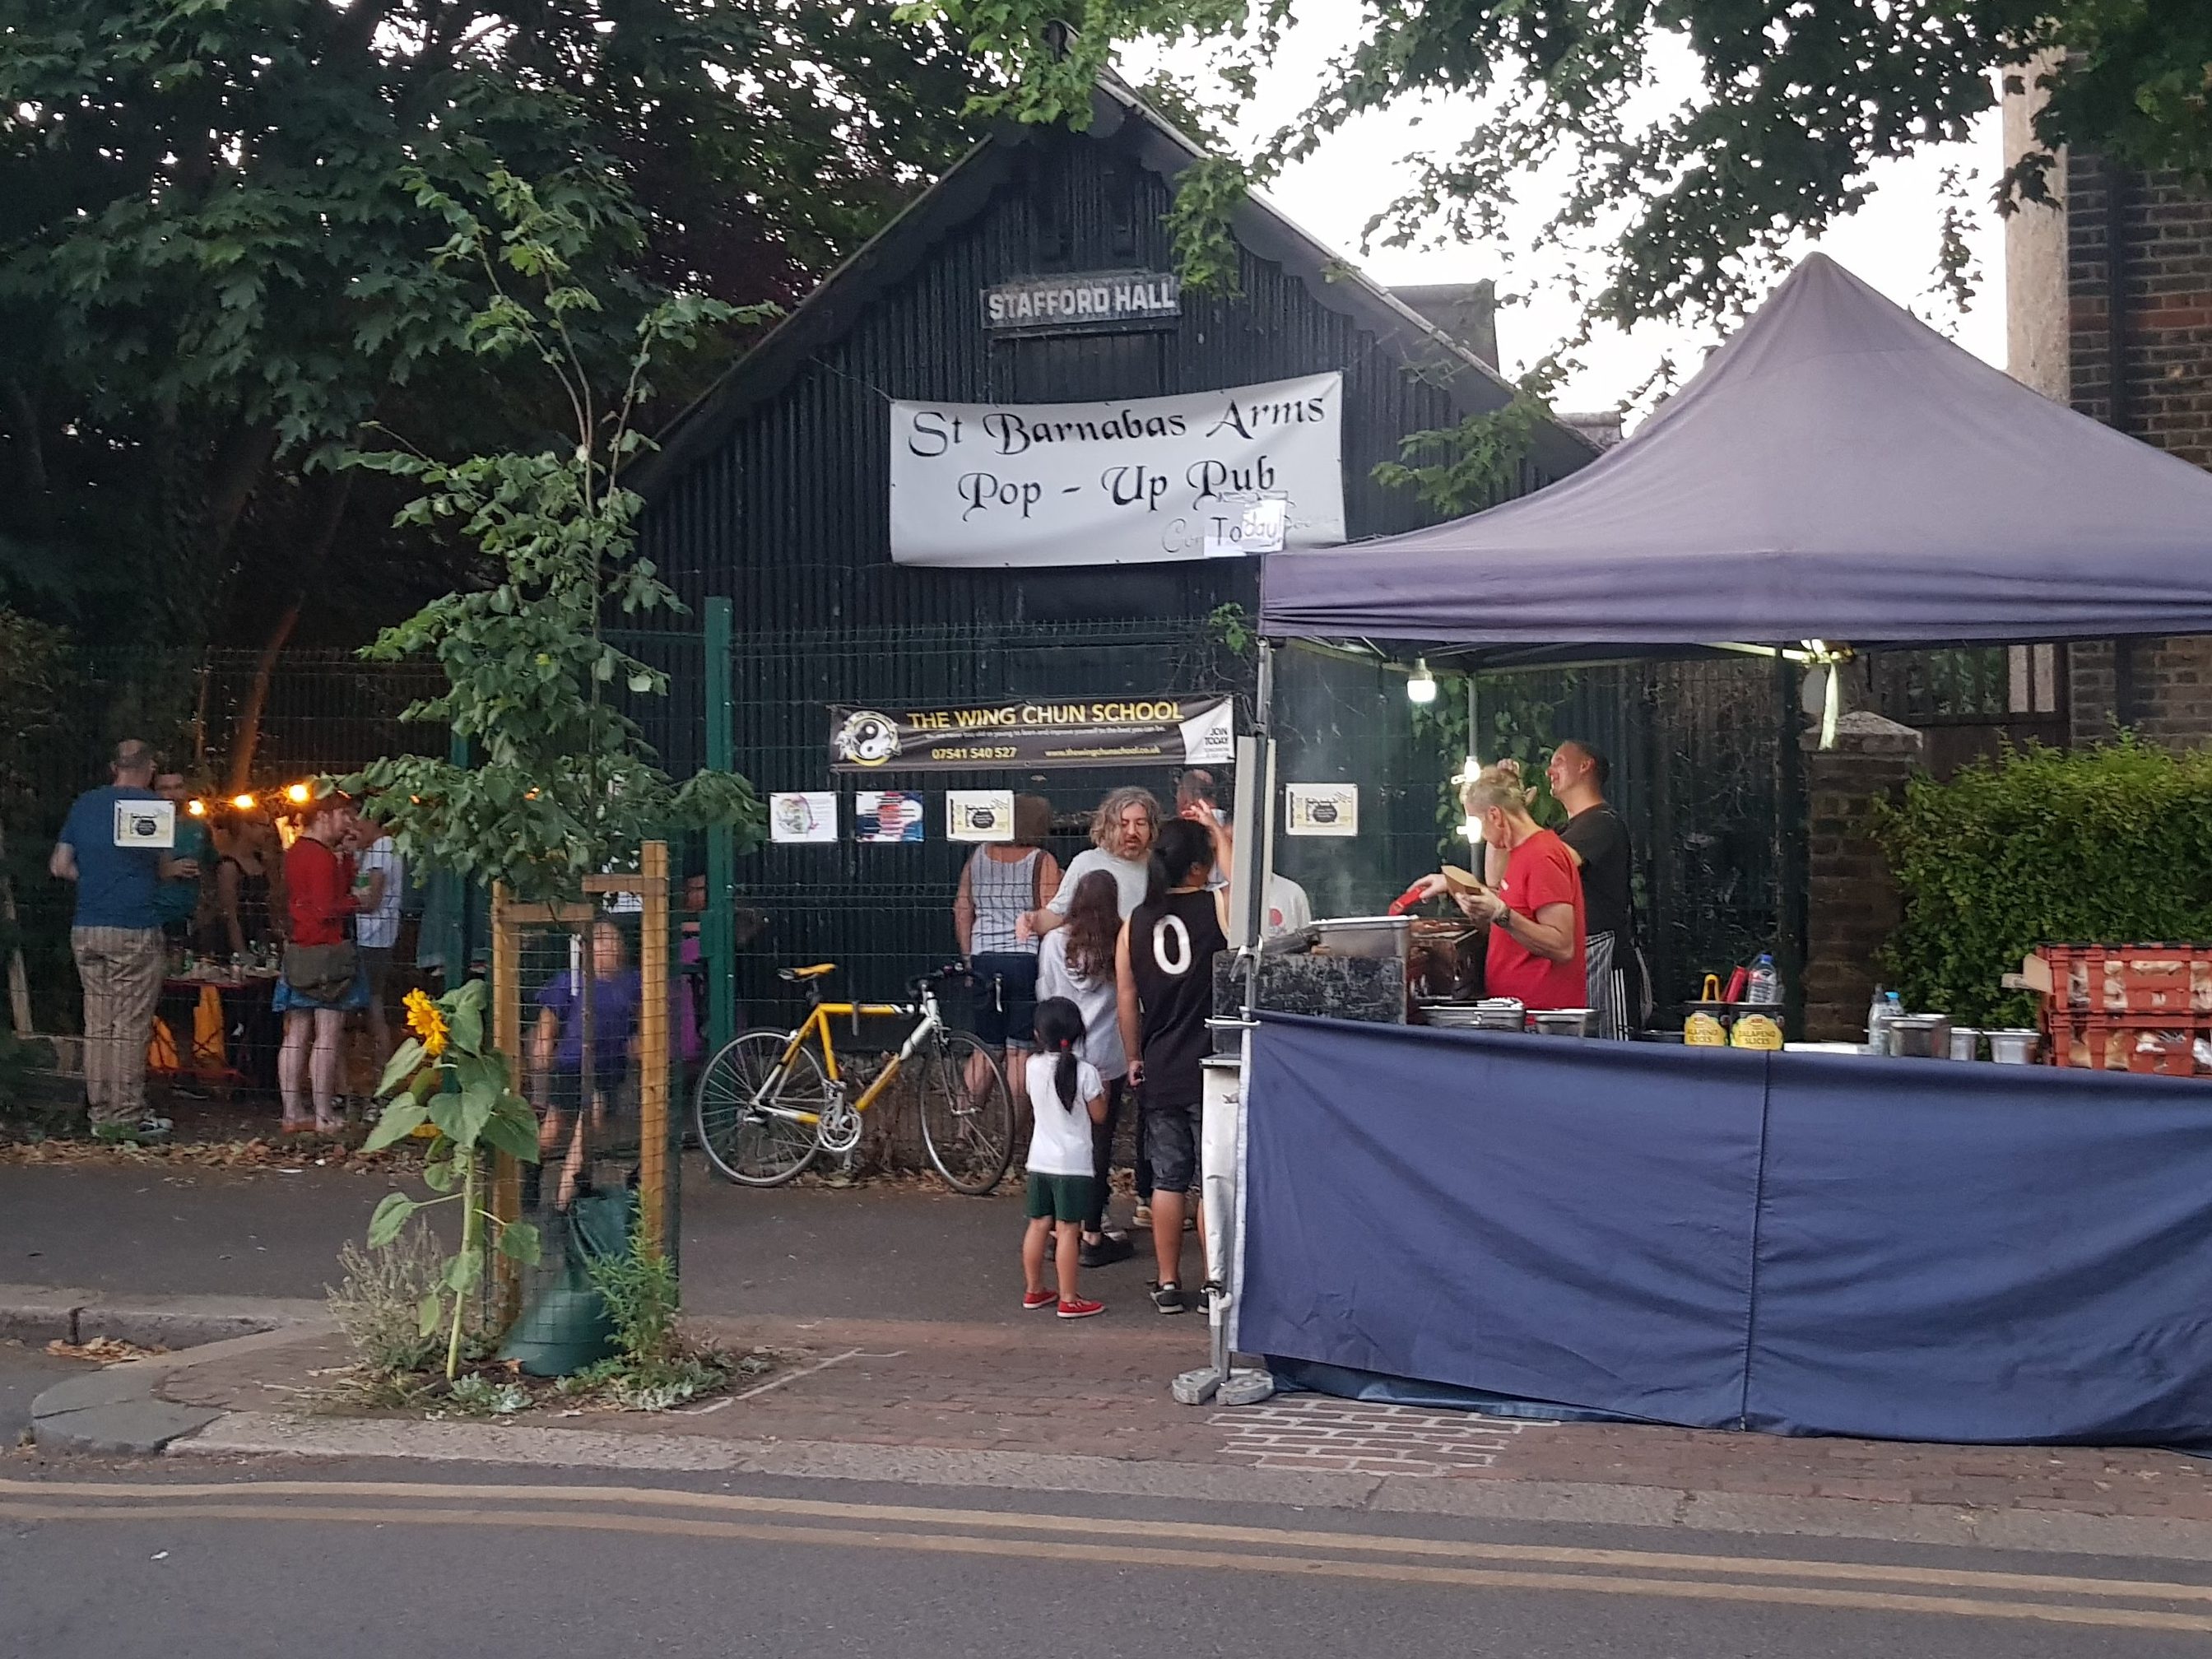 Exterior of Stafford Hall while being used as pop-up pub.  Hot dog stall on pavement